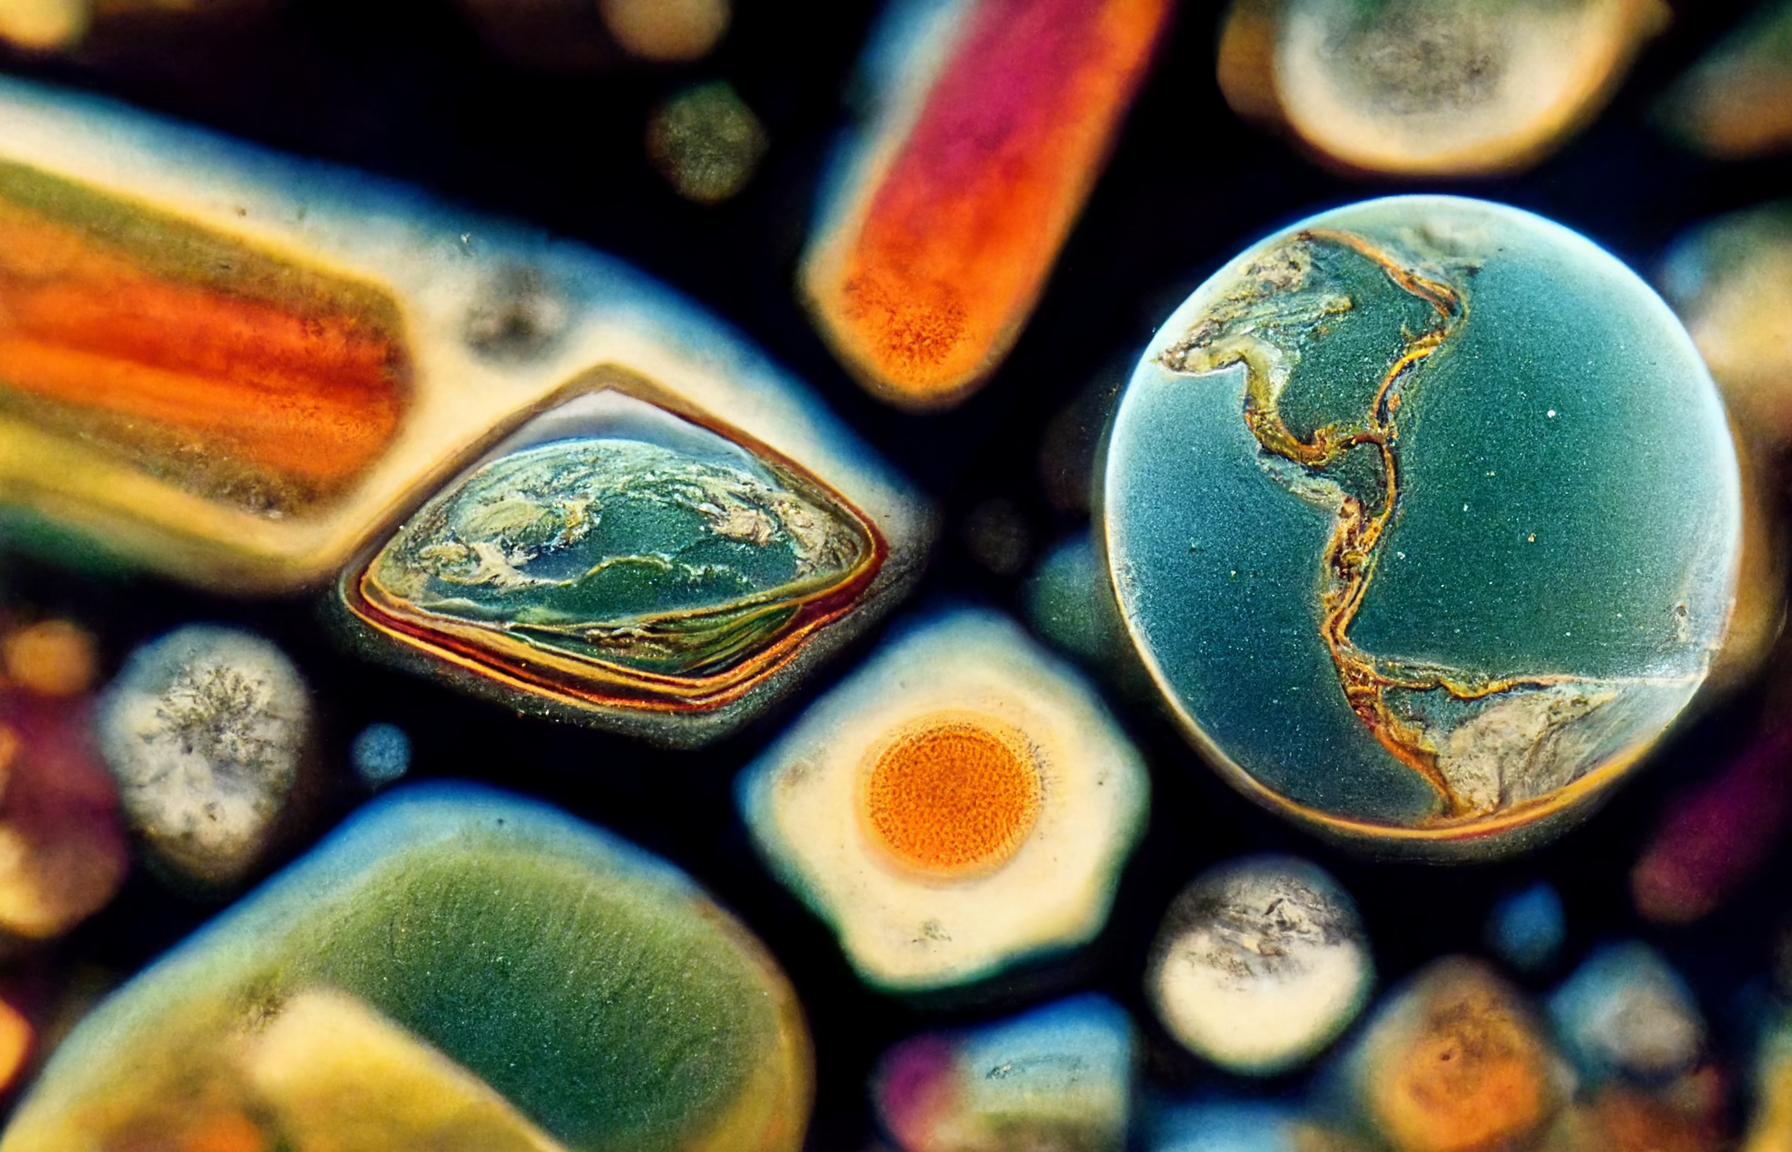 earth on a glass slide under a microscope